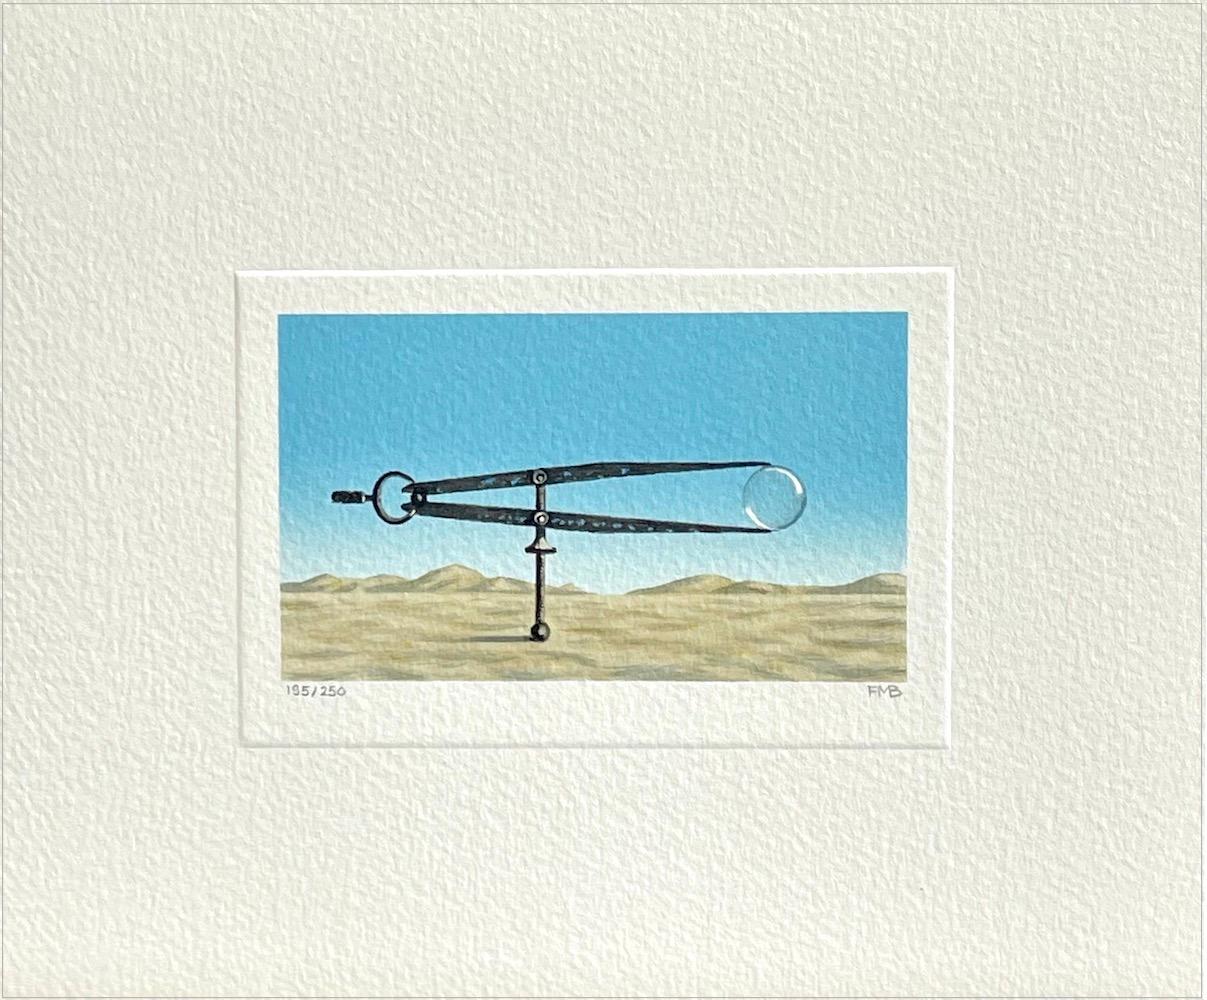 BUBBLE Signed Lithograph Surreal Landscape Vintage Drafting Tool, Blue Sky, Sand - Print by Fanny Brennan